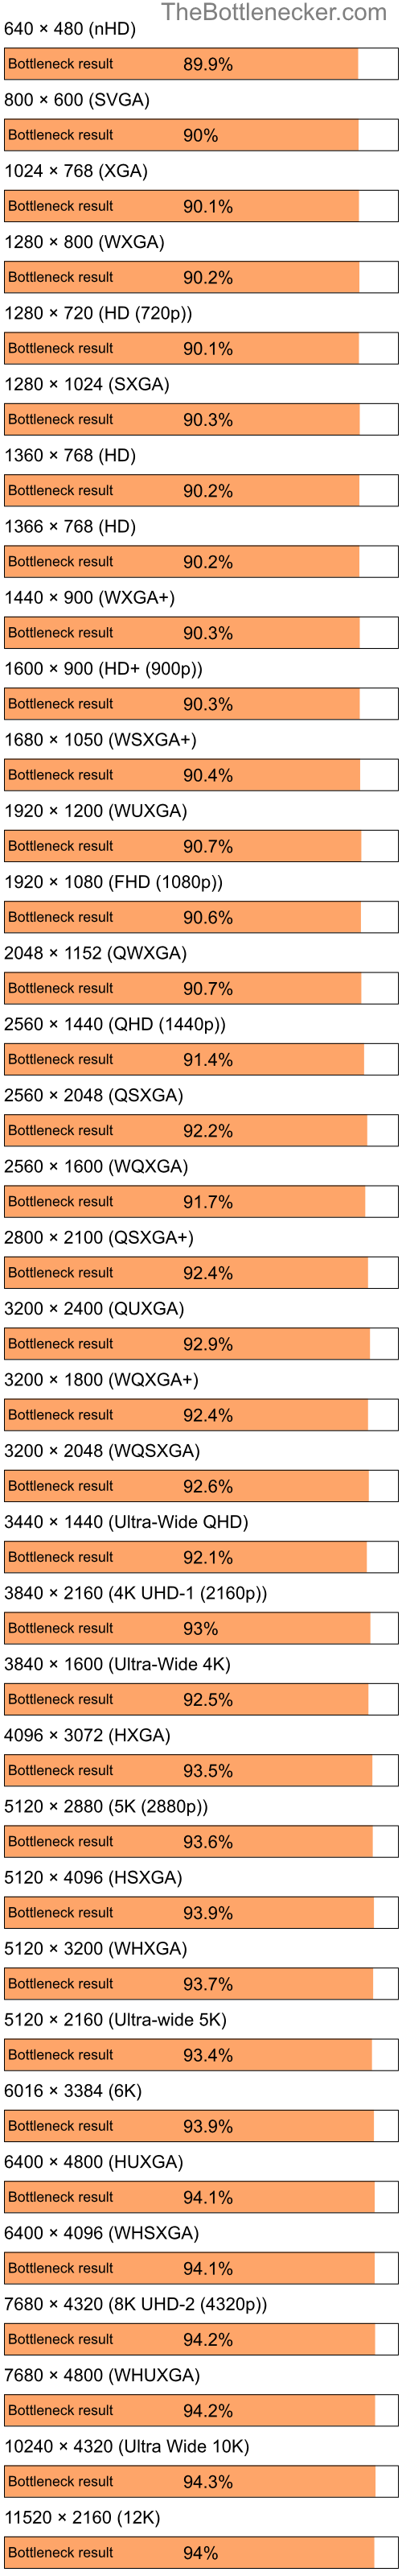 Bottleneck results by resolution for Intel Pentium 4 and NVIDIA GeForce4 Ti 4200 in7 Days to Die